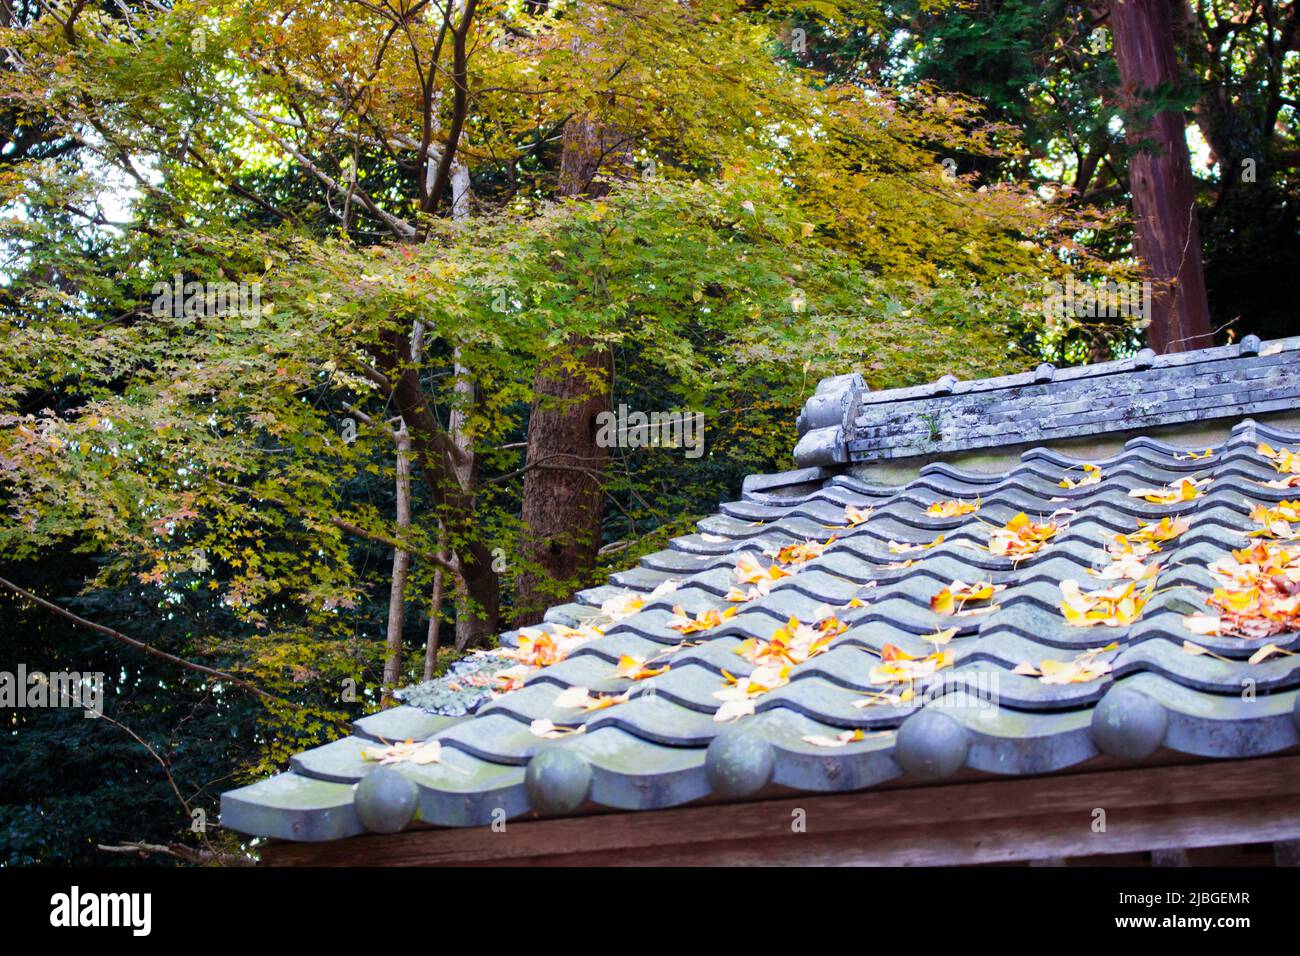 The roof with Japanese tiles (kawara) in autumn, Japan. There are maple leaves on the roof in image. Stock Photo